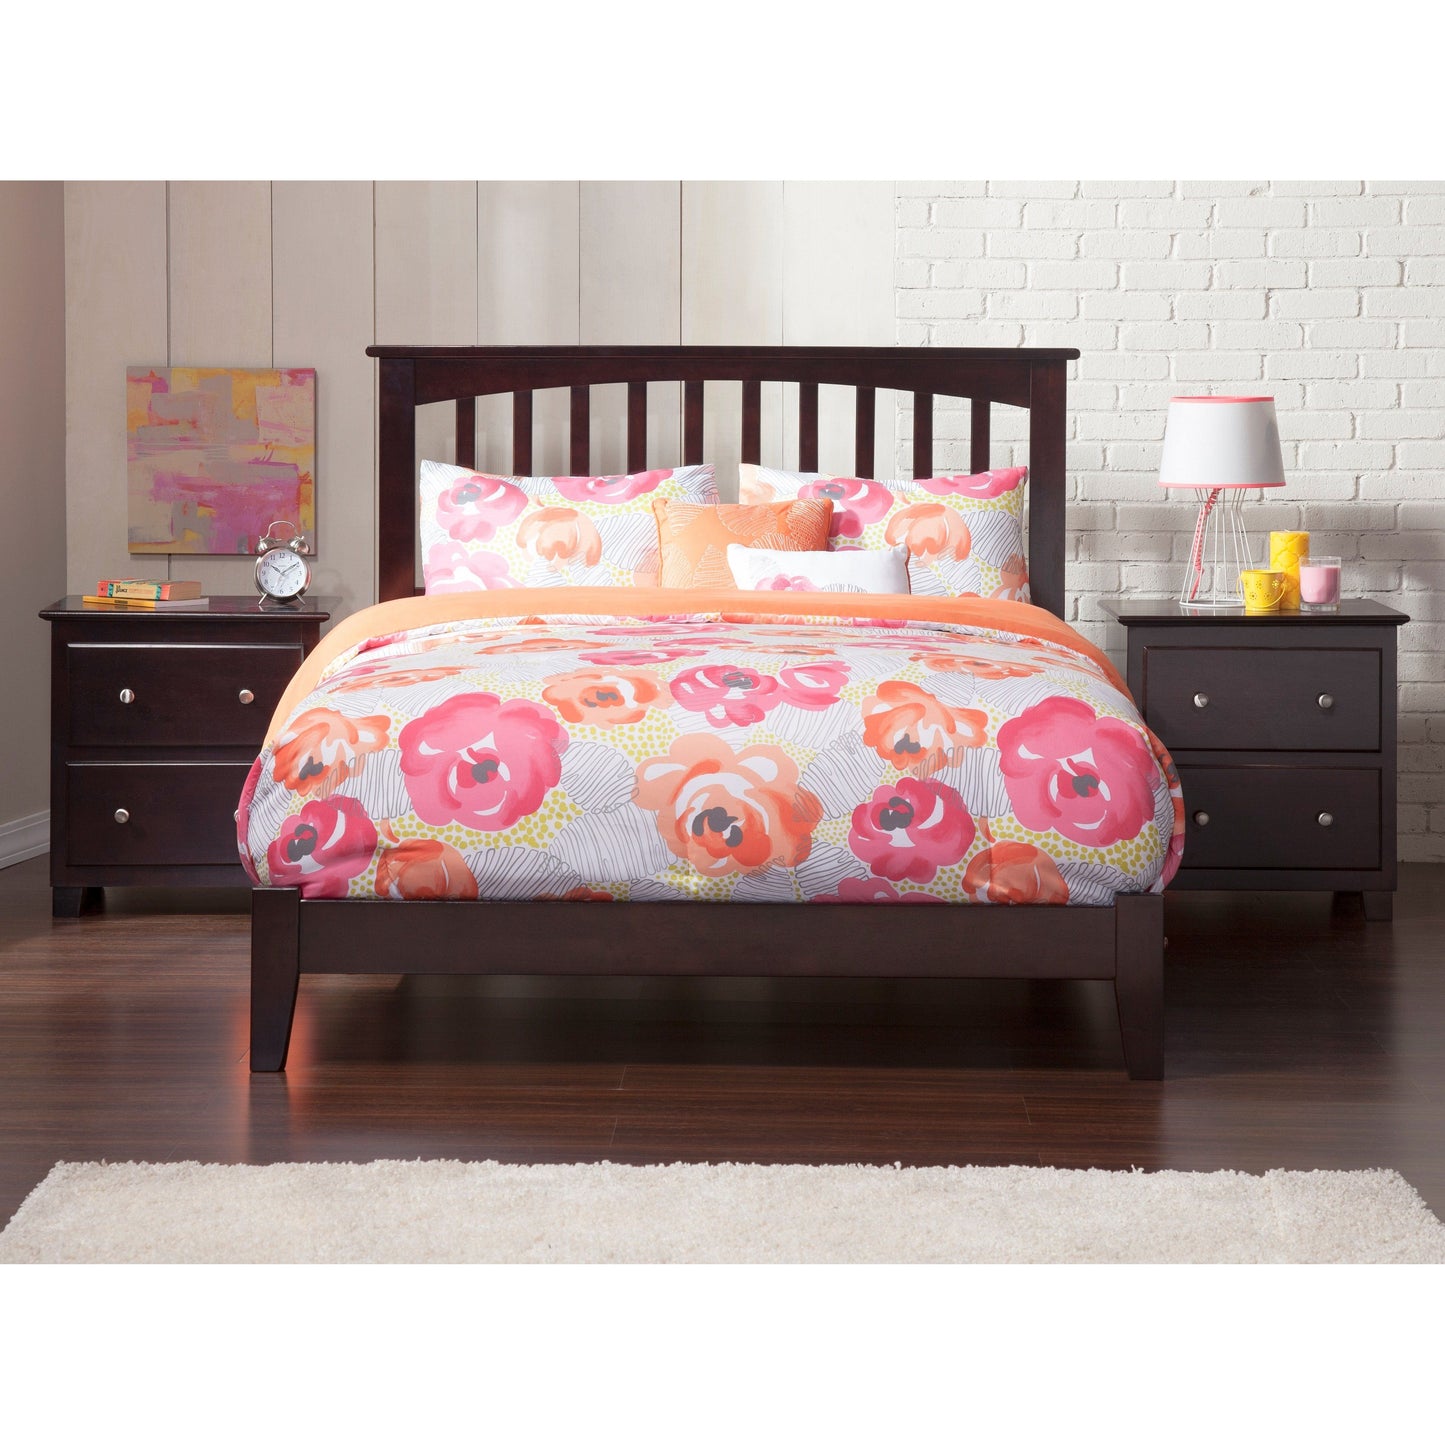 AFI Furnishings Mission Full Platform Bed with Open Foot Board